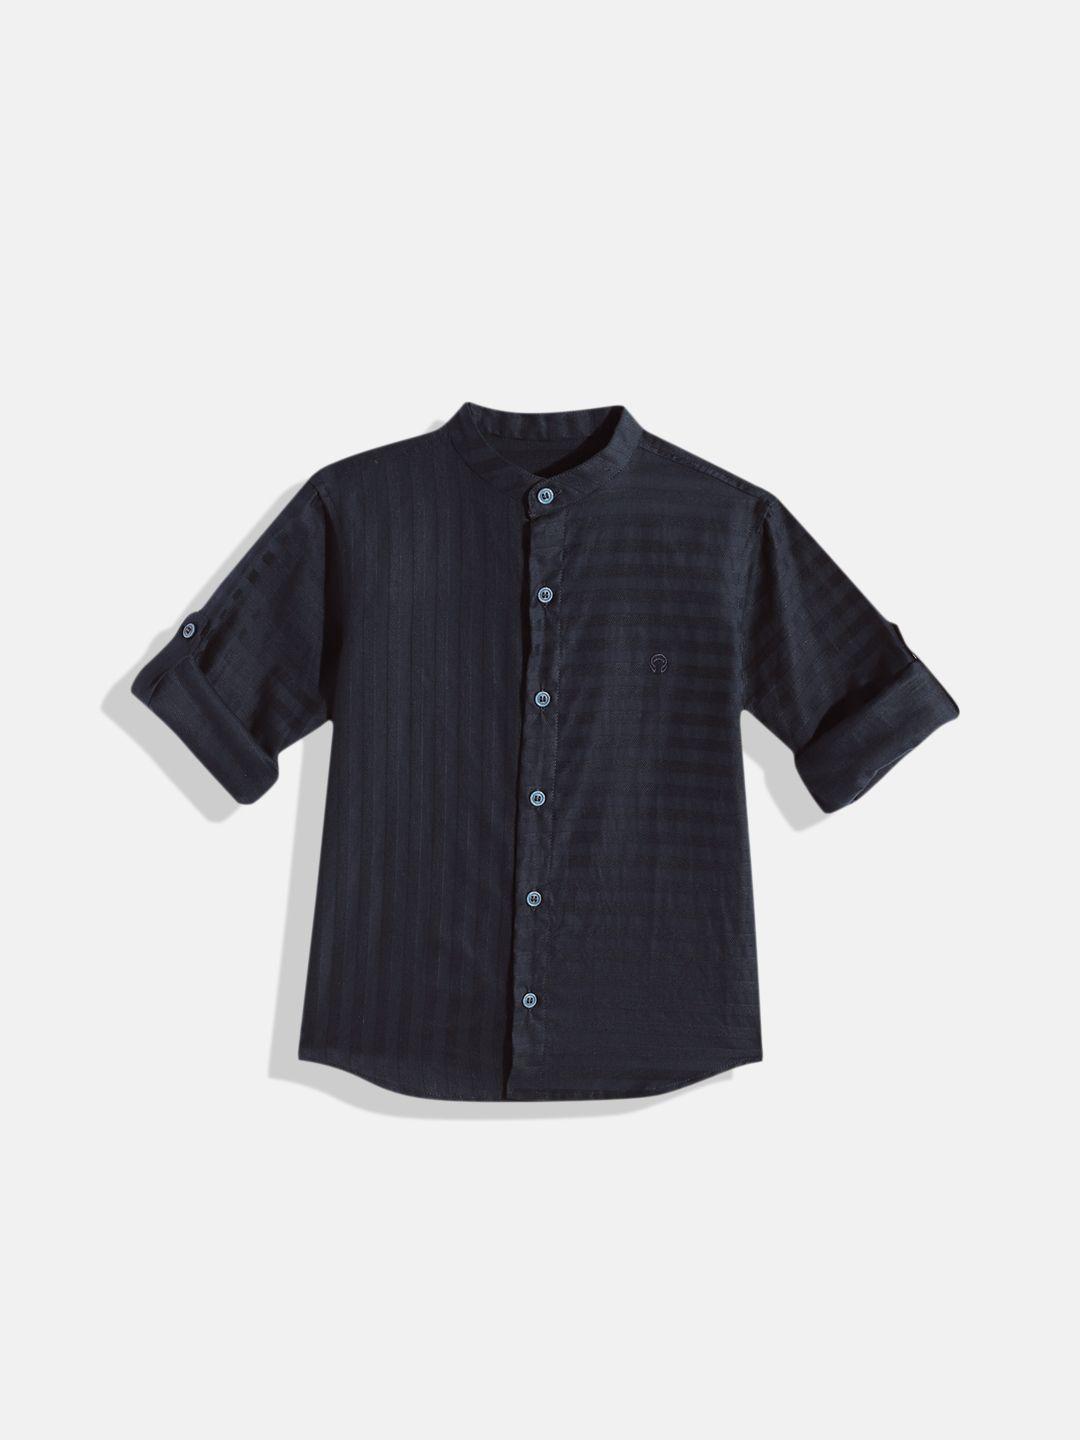 couper & coll boys navy blue striped casual shirt